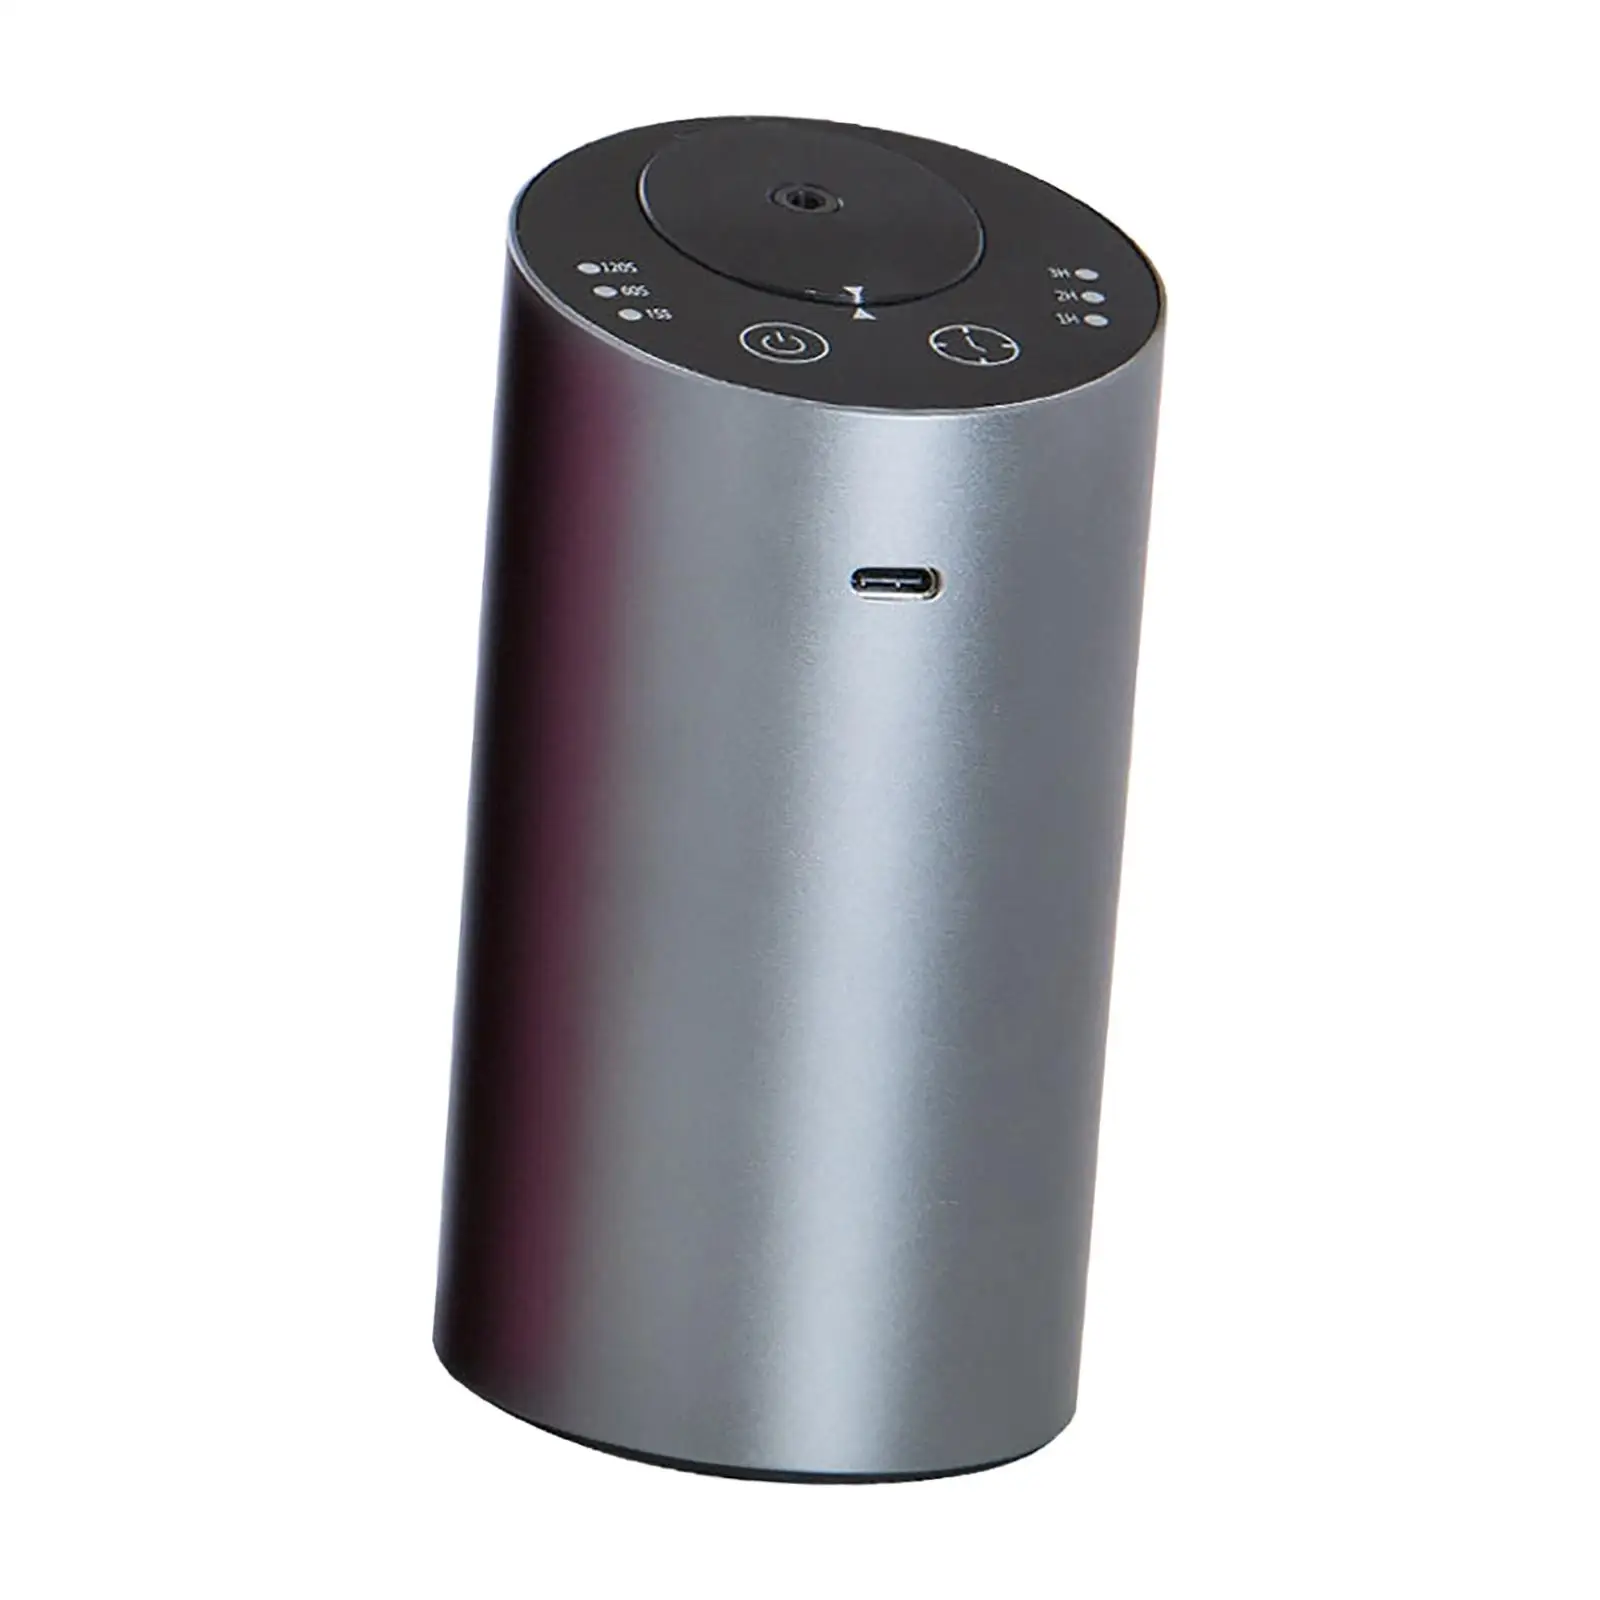  Diffuser, Professional  Diffuser for Meditation, Spa,   for Essential Oils, Compact and Portable